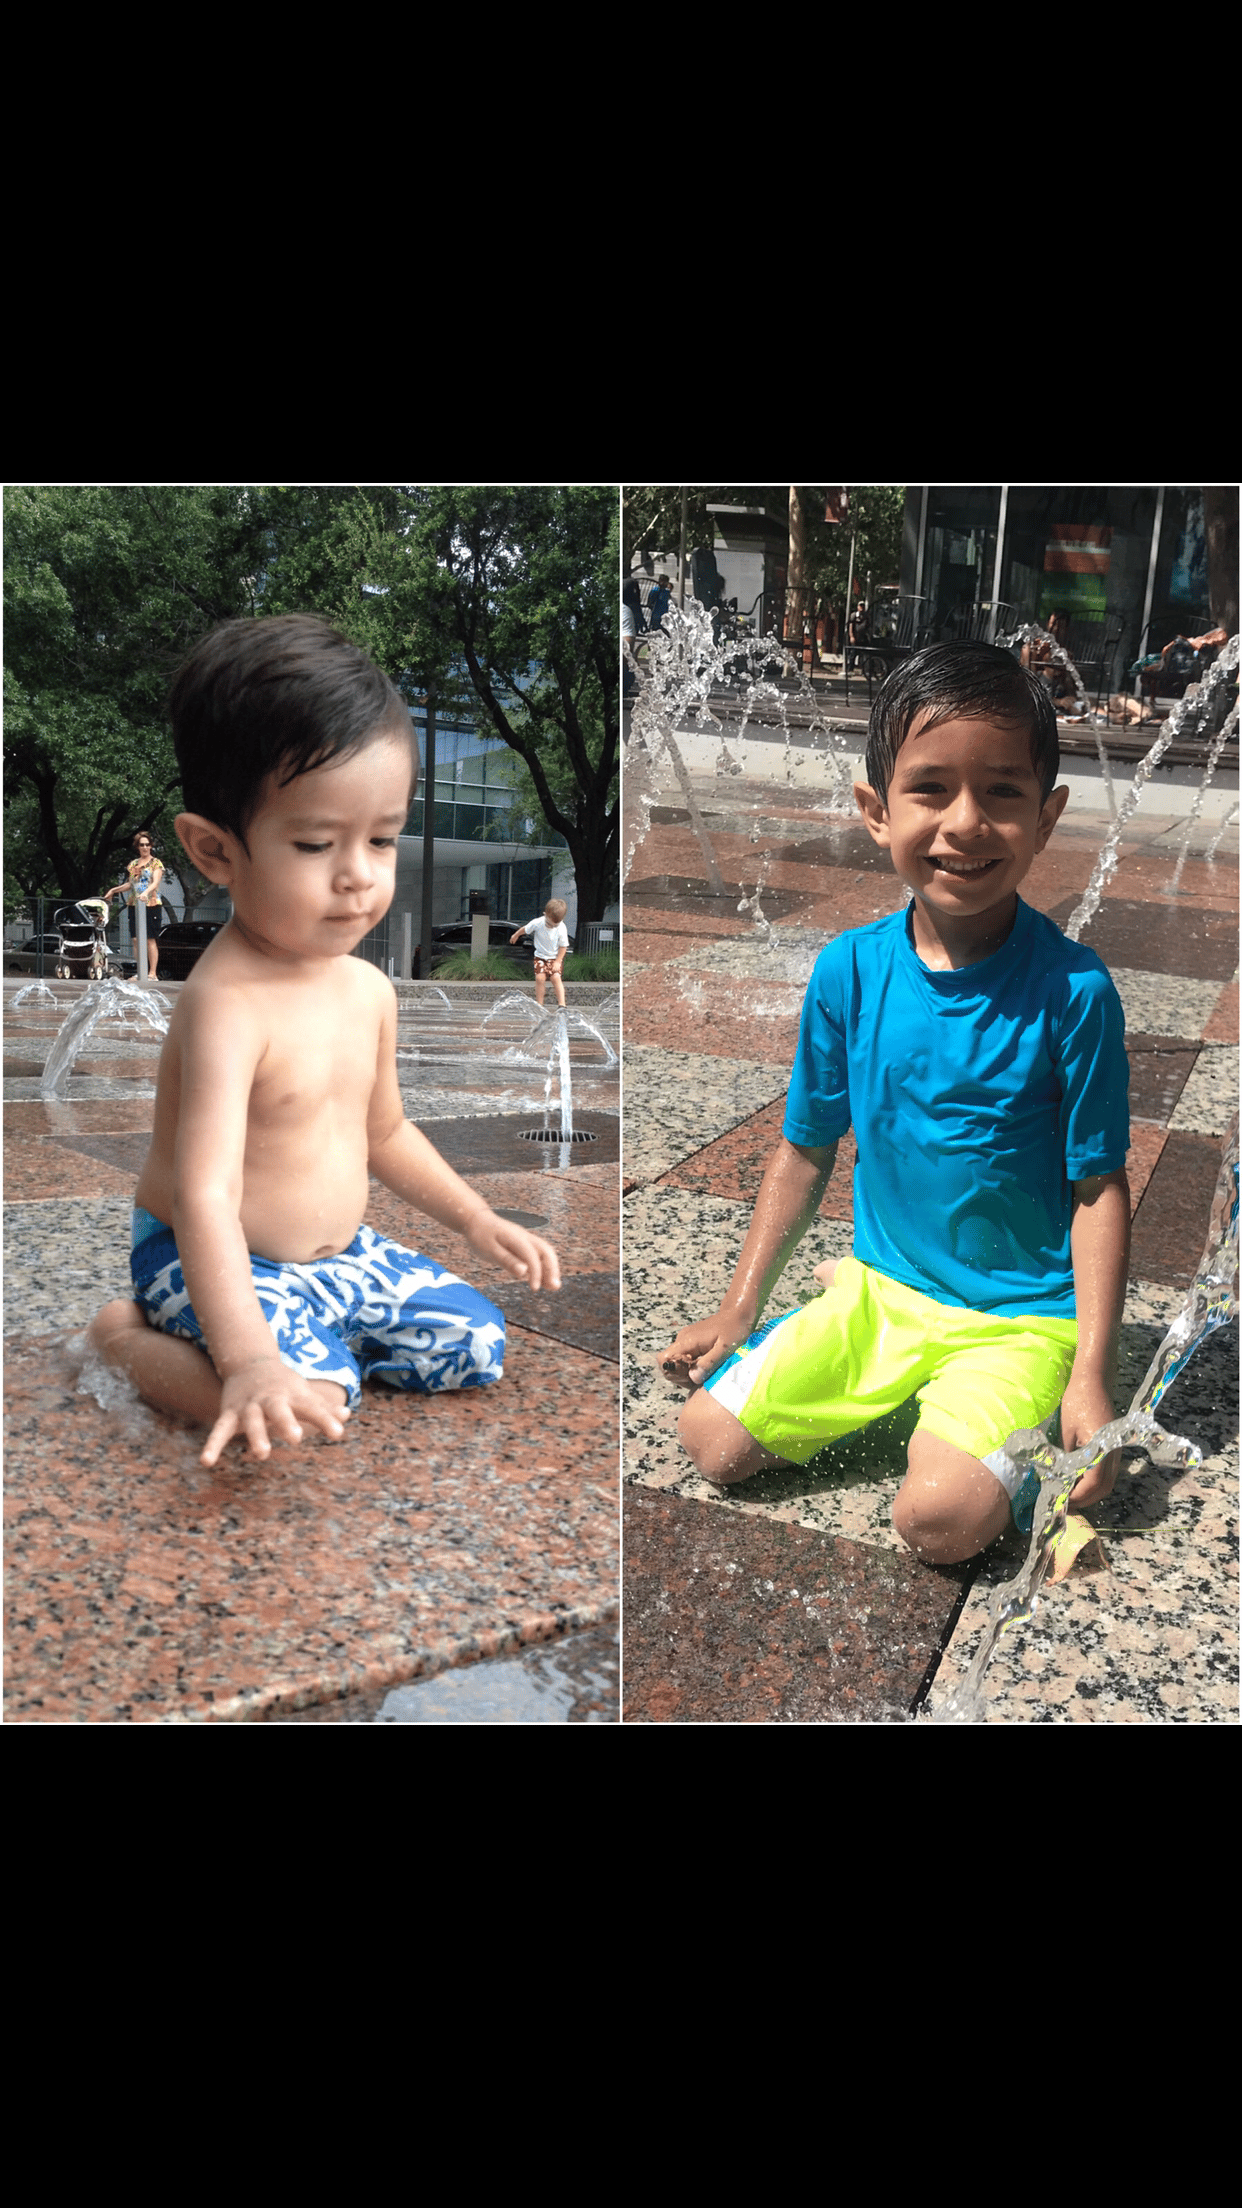 A boy grows up in these two photos at the water fountains at Discovery Green